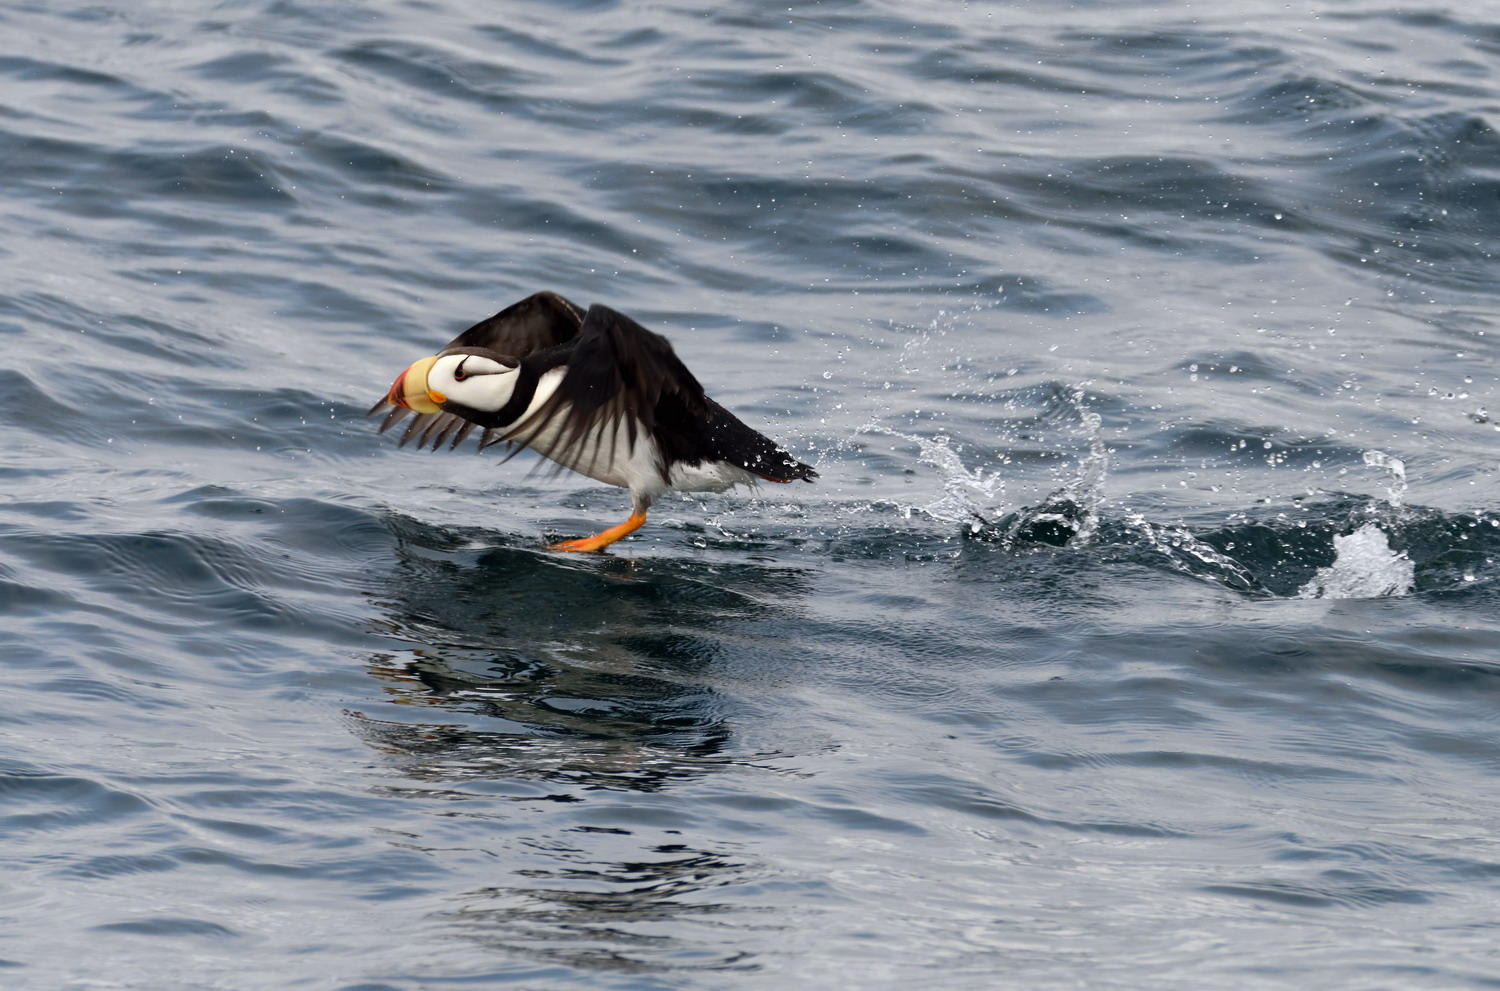 DSC_8261_1A1 - Tufted Puffin